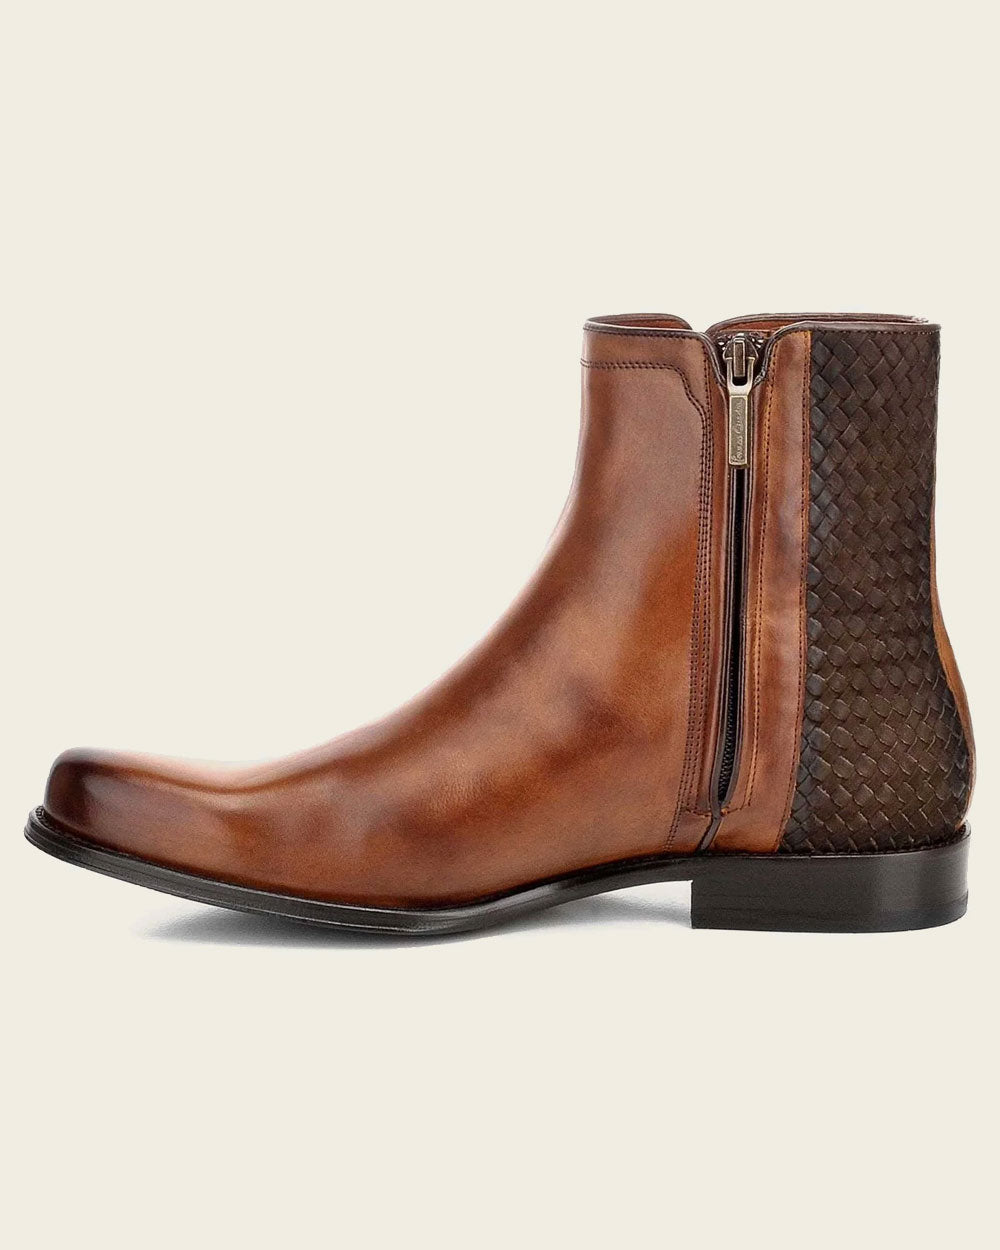 The handwoven application in the back adds an extra touch of detail and texture. Making this boot stand out from the crowd.